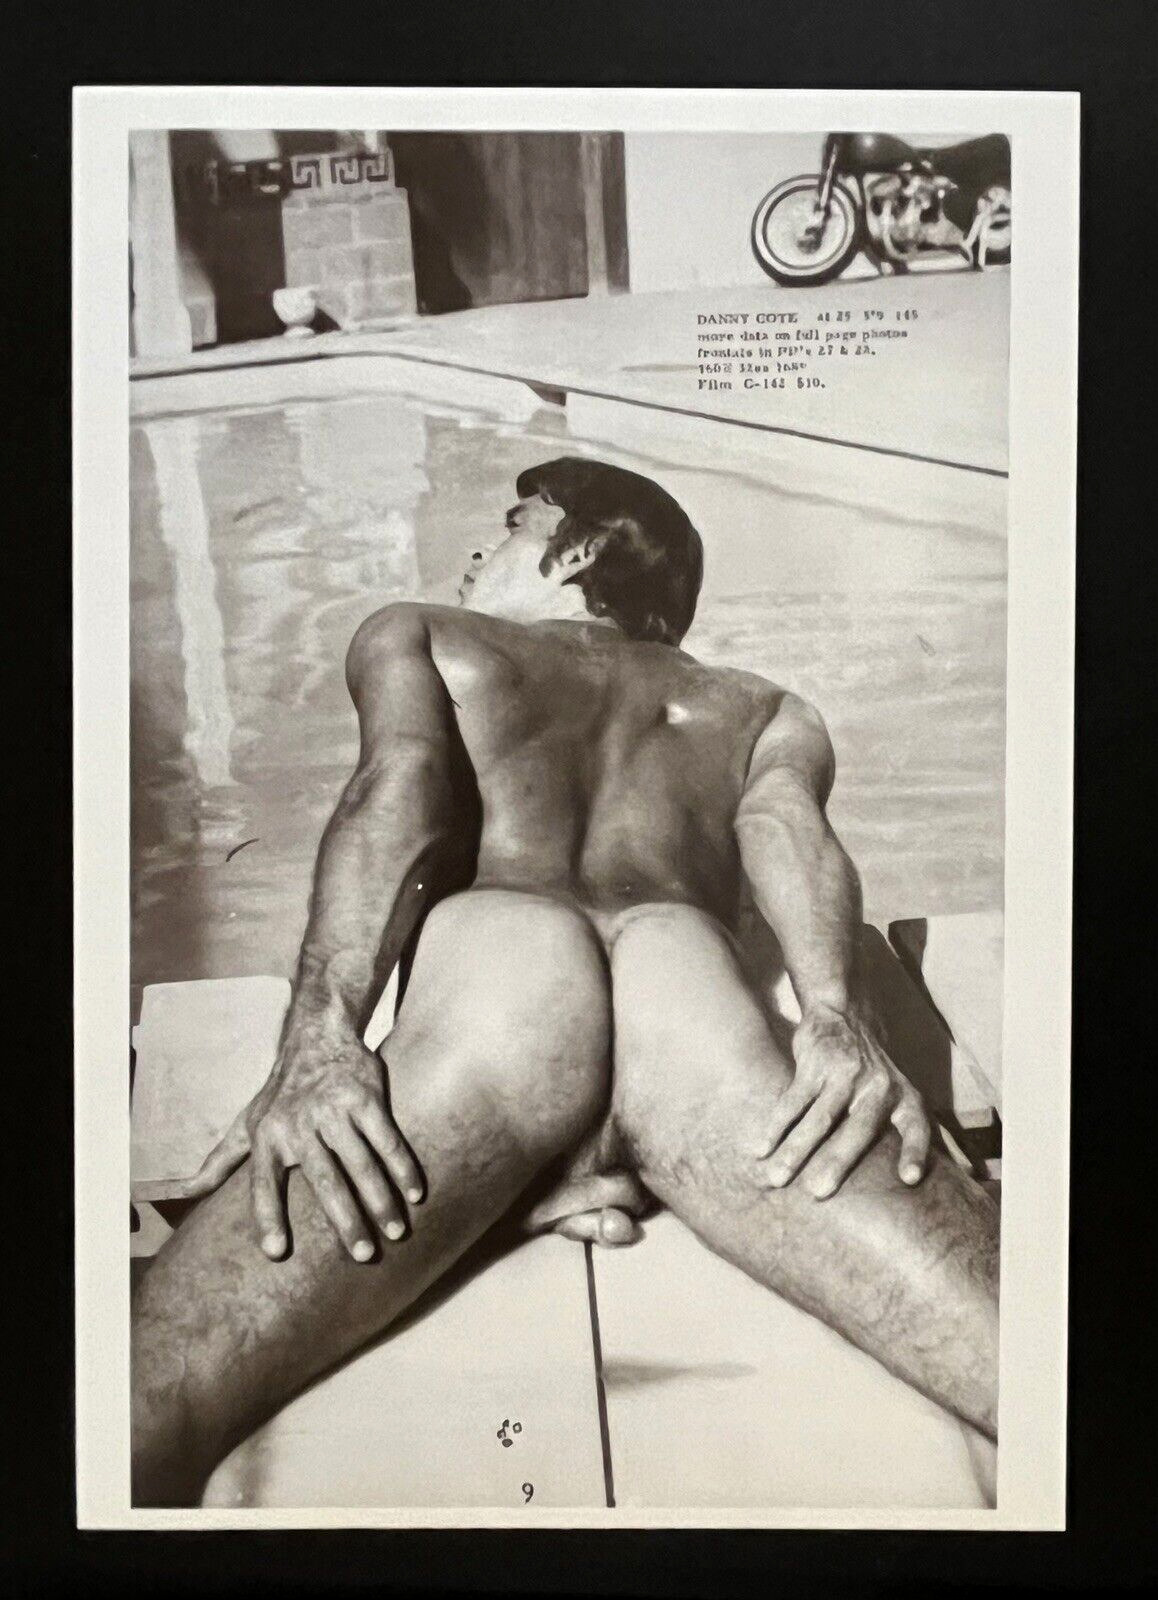 1997 Post Card Taschen Physique Pictorial Danny Cote Nude Male Swimming Pool